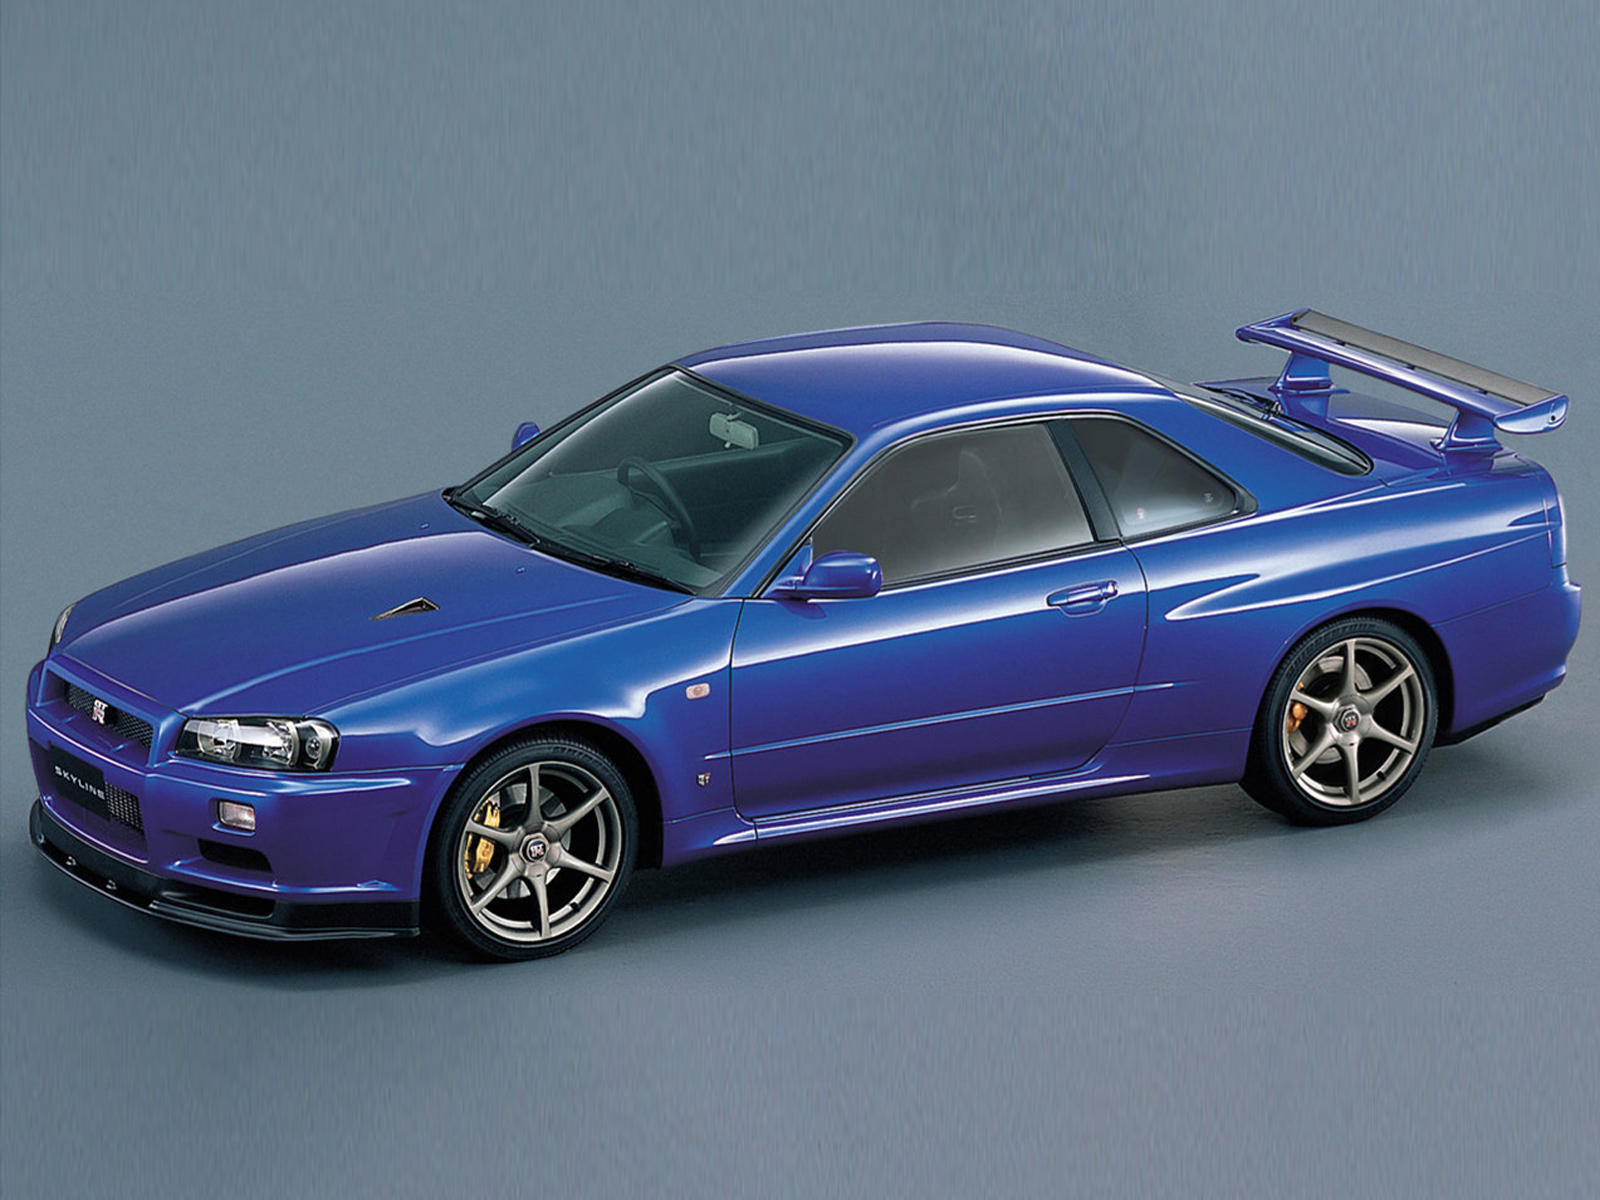 R Nissan Skyline Gt R Sets A Record Breaking Price Carbuzz